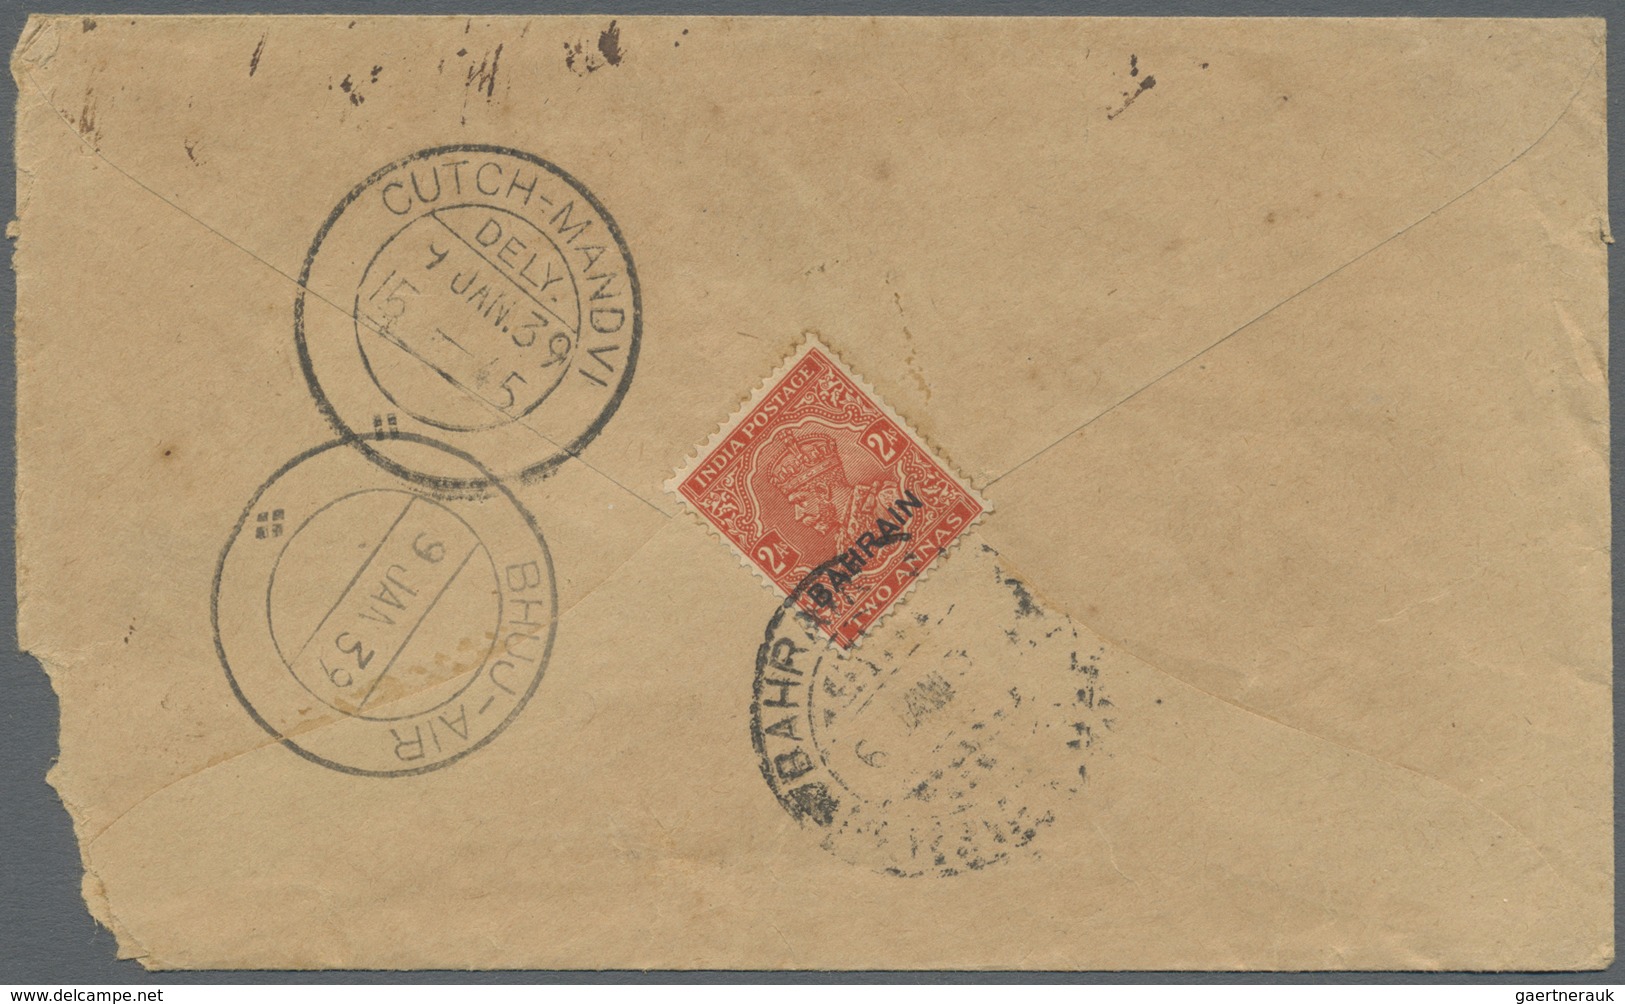 Br Bahrain: 1932-39: Four Covers From Bahrain To Cutch-Mandvi, India, With 1932 Cover Franked India (un - Bahrain (1965-...)